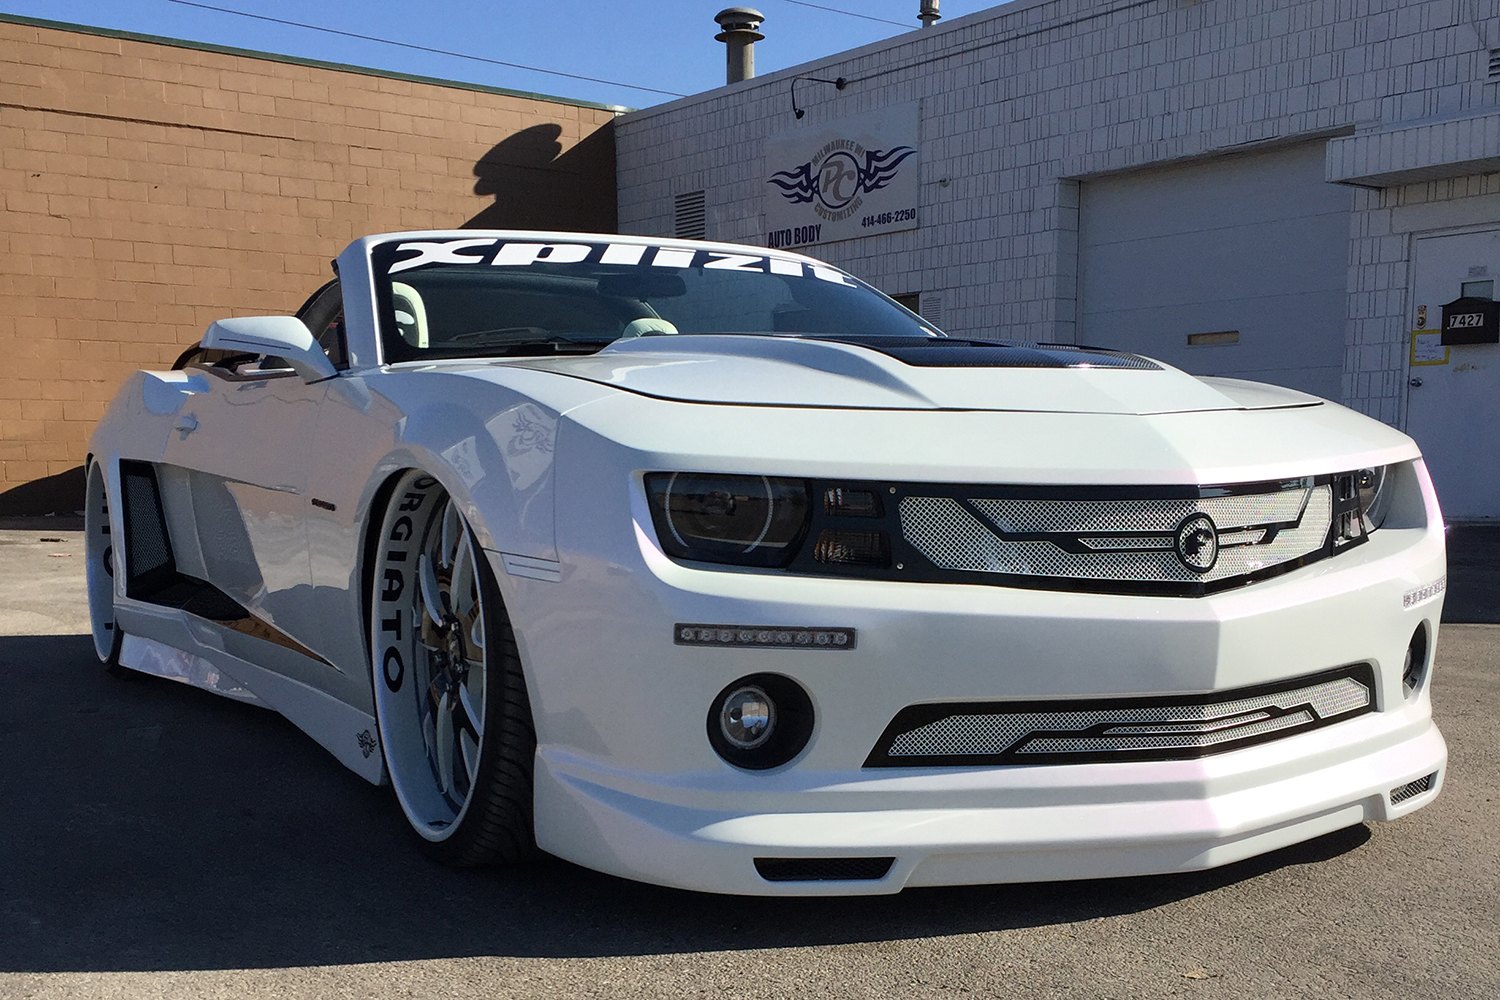 Chevy Camaro SS Convertible With Crazy Body Kit - Photo by Forgiato